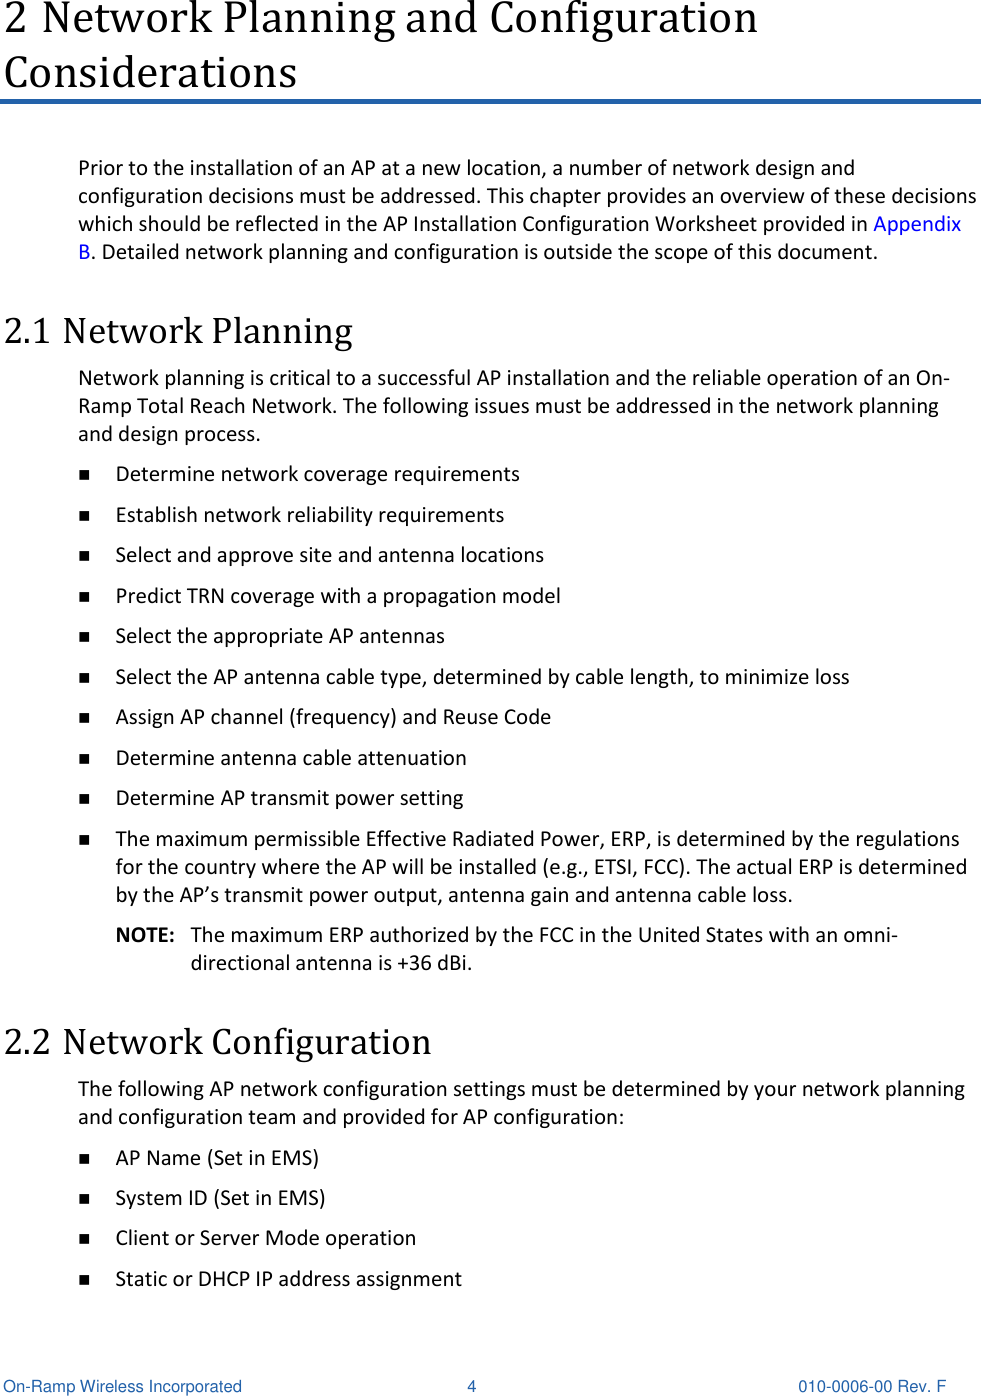  On-Ramp Wireless Incorporated  4  010-0006-00 Rev. F 2 Network Planning and Configuration Considerations Prior to the installation of an AP at a new location, a number of network design and configuration decisions must be addressed. This chapter provides an overview of these decisions which should be reflected in the AP Installation Configuration Worksheet provided in Appendix B. Detailed network planning and configuration is outside the scope of this document. 2.1 Network Planning Network planning is critical to a successful AP installation and the reliable operation of an On-Ramp Total Reach Network. The following issues must be addressed in the network planning and design process.  Determine network coverage requirements  Establish network reliability requirements  Select and approve site and antenna locations  Predict TRN coverage with a propagation model  Select the appropriate AP antennas  Select the AP antenna cable type, determined by cable length, to minimize loss  Assign AP channel (frequency) and Reuse Code  Determine antenna cable attenuation  Determine AP transmit power setting  The maximum permissible Effective Radiated Power, ERP, is determined by the regulations for the country where the AP will be installed (e.g., ETSI, FCC). The actual ERP is determined by the AP’s transmit power output, antenna gain and antenna cable loss. NOTE:  The maximum ERP authorized by the FCC in the United States with an omni-directional antenna is +36 dBi. 2.2 Network Configuration The following AP network configuration settings must be determined by your network planning and configuration team and provided for AP configuration:  AP Name (Set in EMS)  System ID (Set in EMS)  Client or Server Mode operation  Static or DHCP IP address assignment 